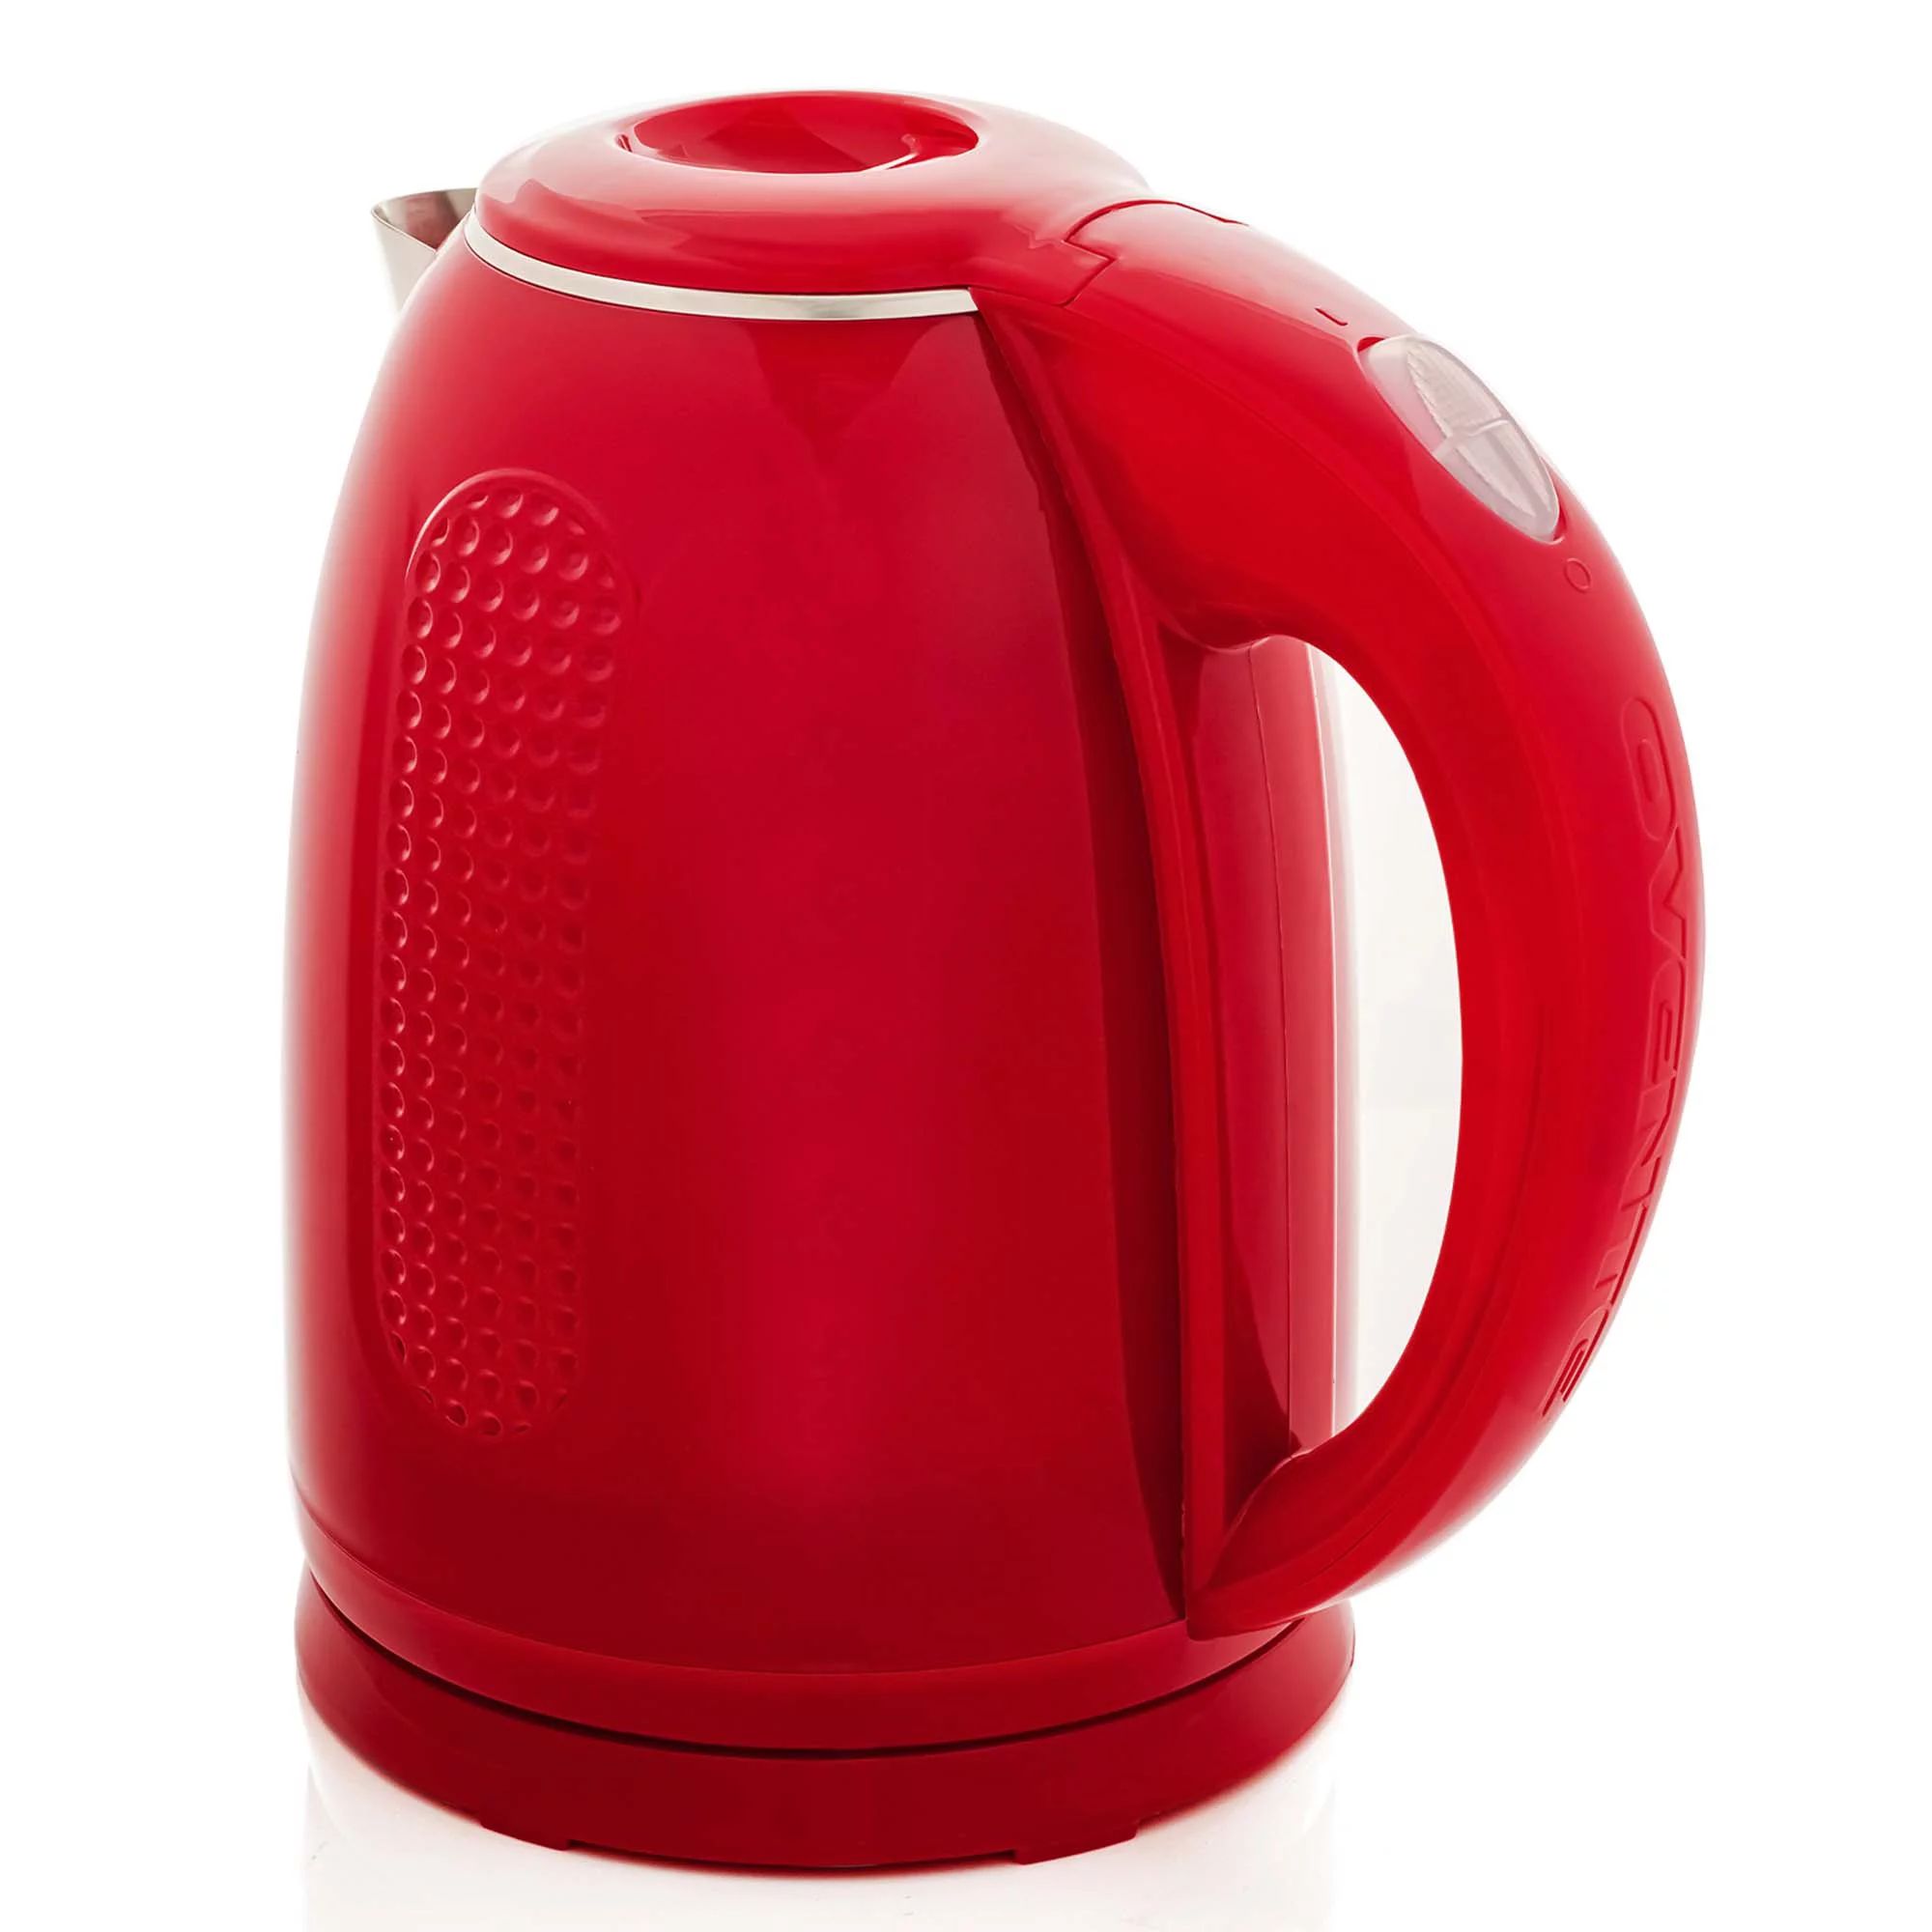 Ovente Portable Electric Kettle Stainless Steel Instant Hot Water Boiler Heater 1.7 Liter 1100W D... | Walmart (US)